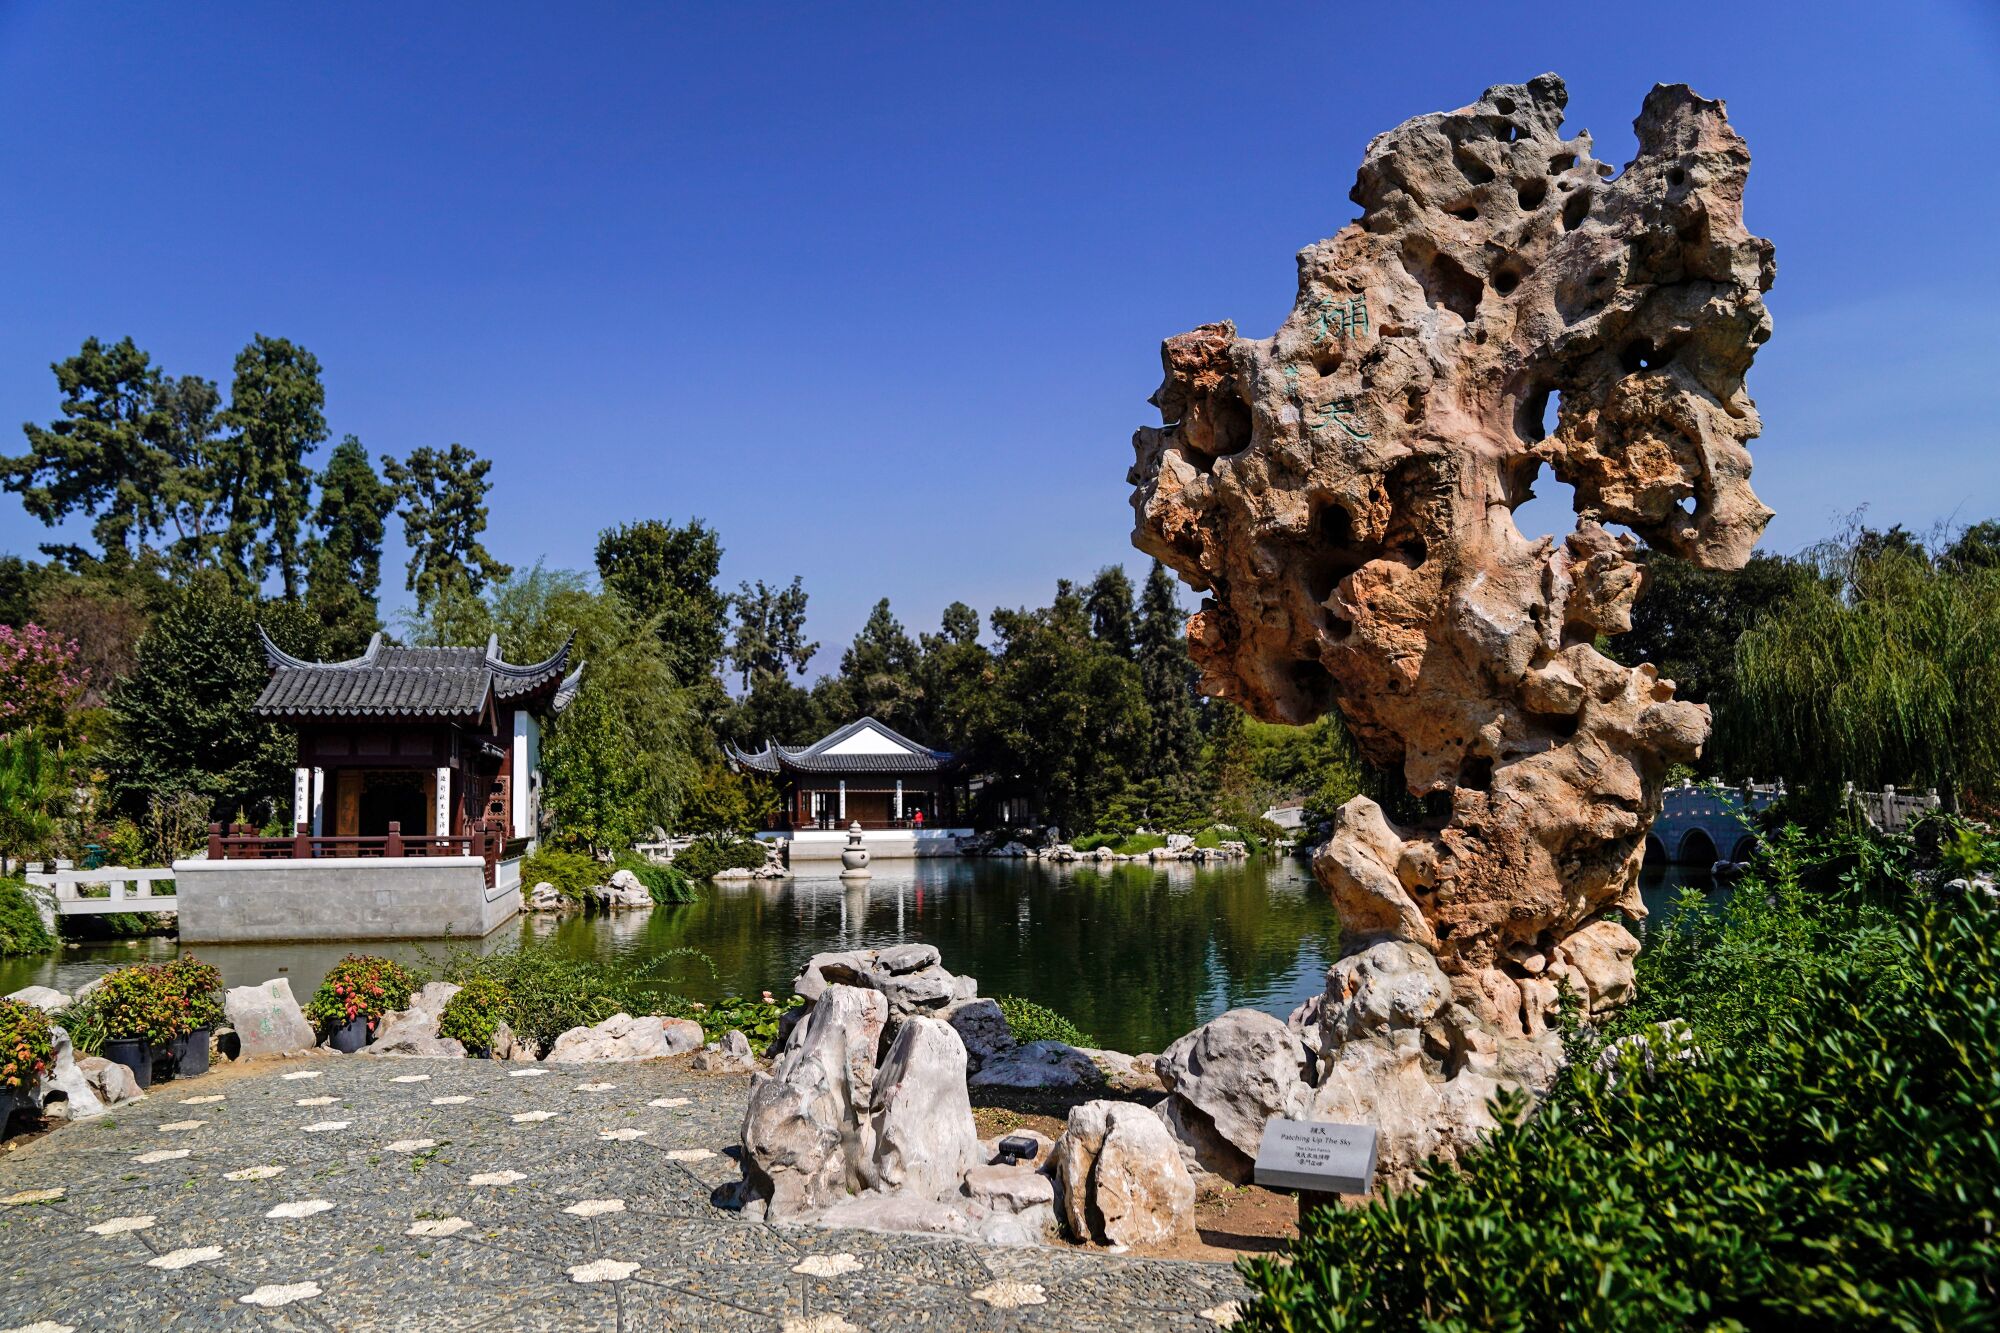 The Chinese Garden at the Huntington Library, Art Museum, and Botanical Gardens.